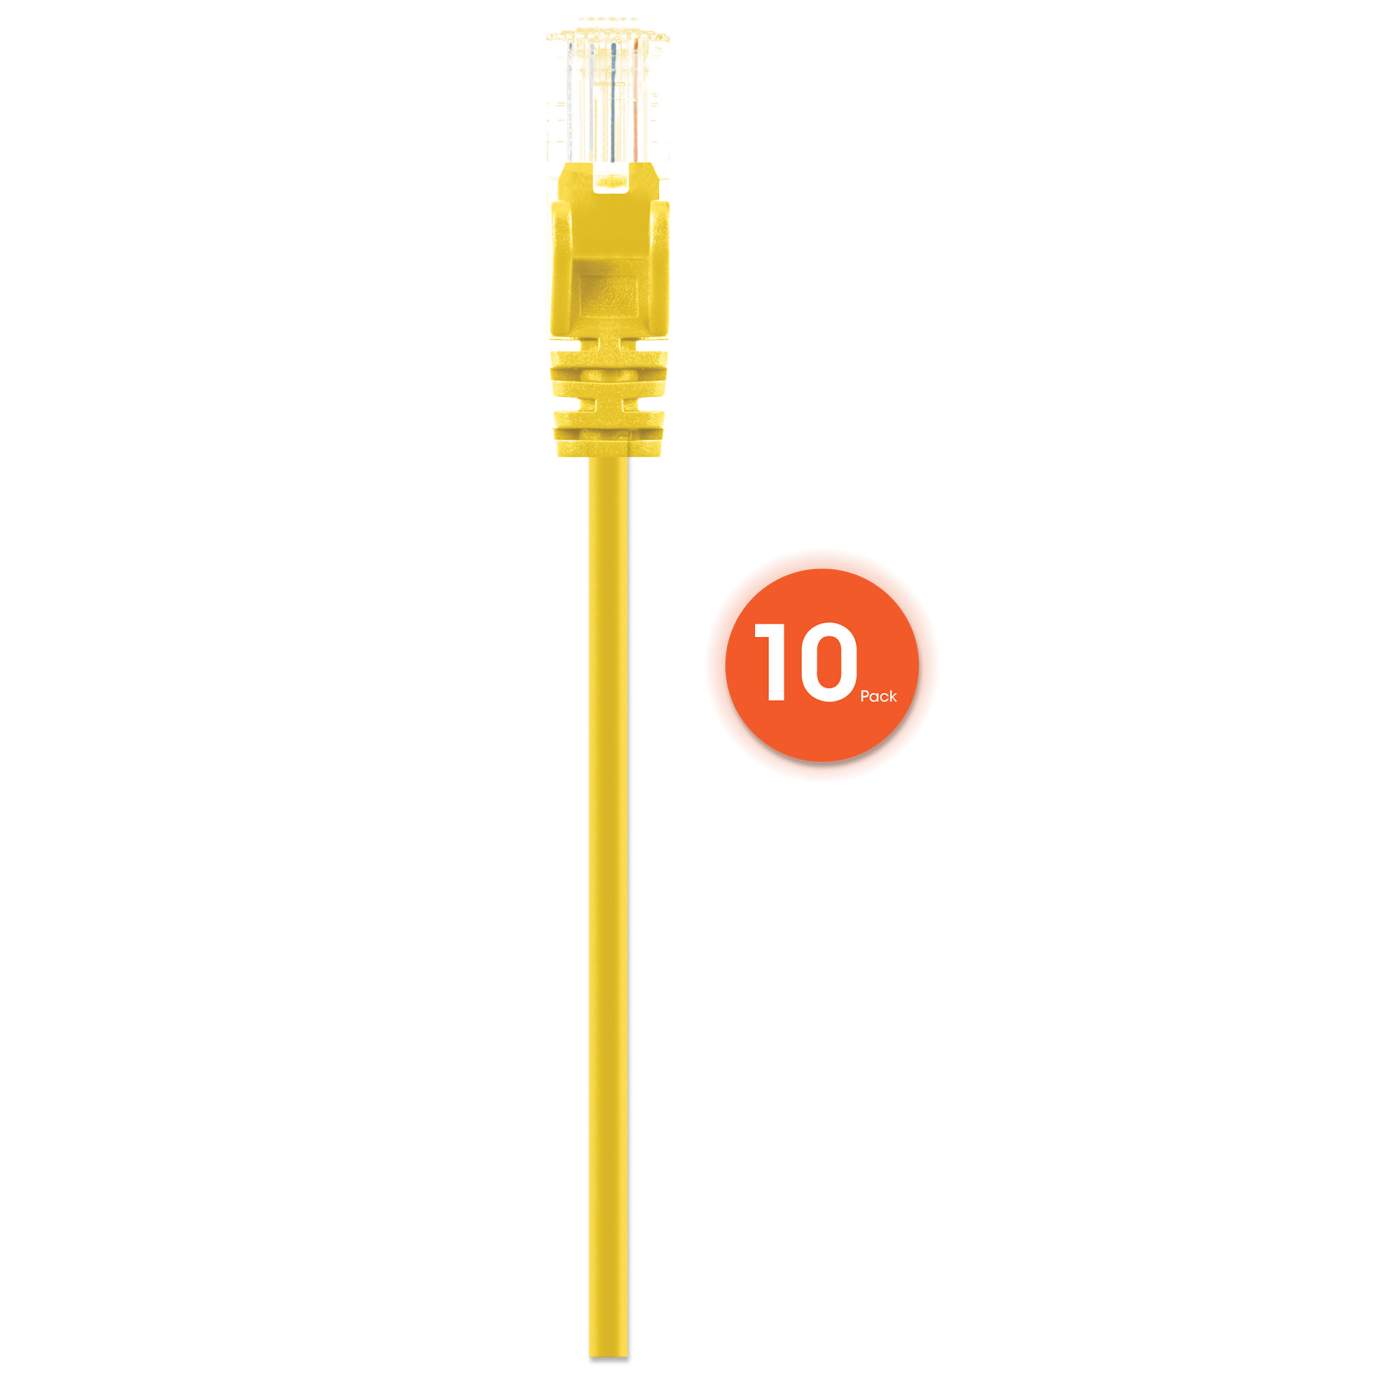 Cat6 U/UTP Slim Network Patch Cable, 10 ft., Yellow, 10-Pack Image 4